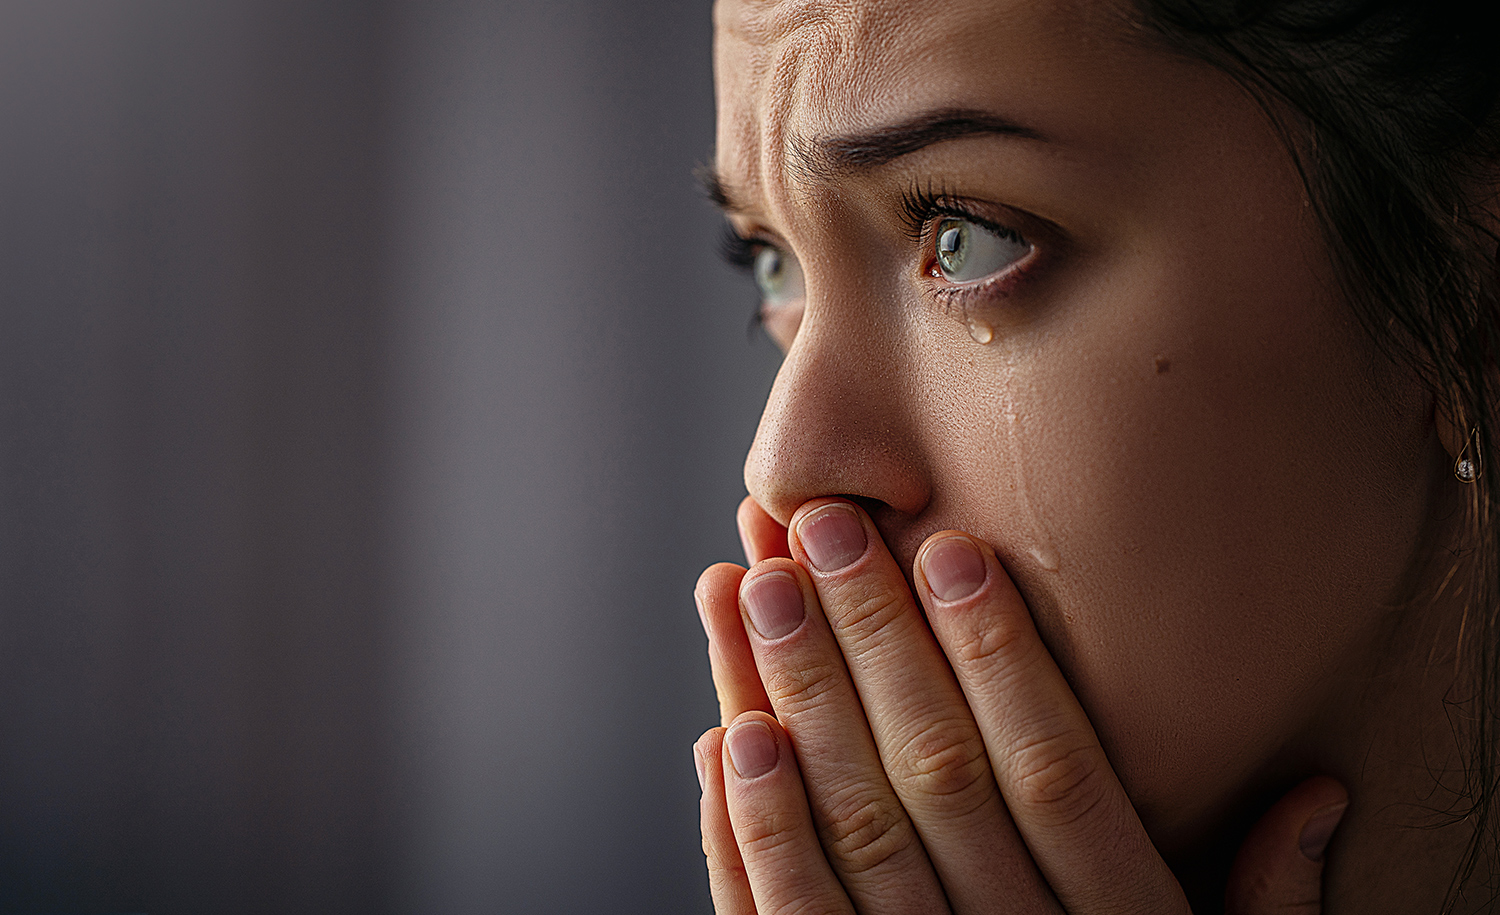 Do You Cry Easily? Here's the Most Likely Reason Why